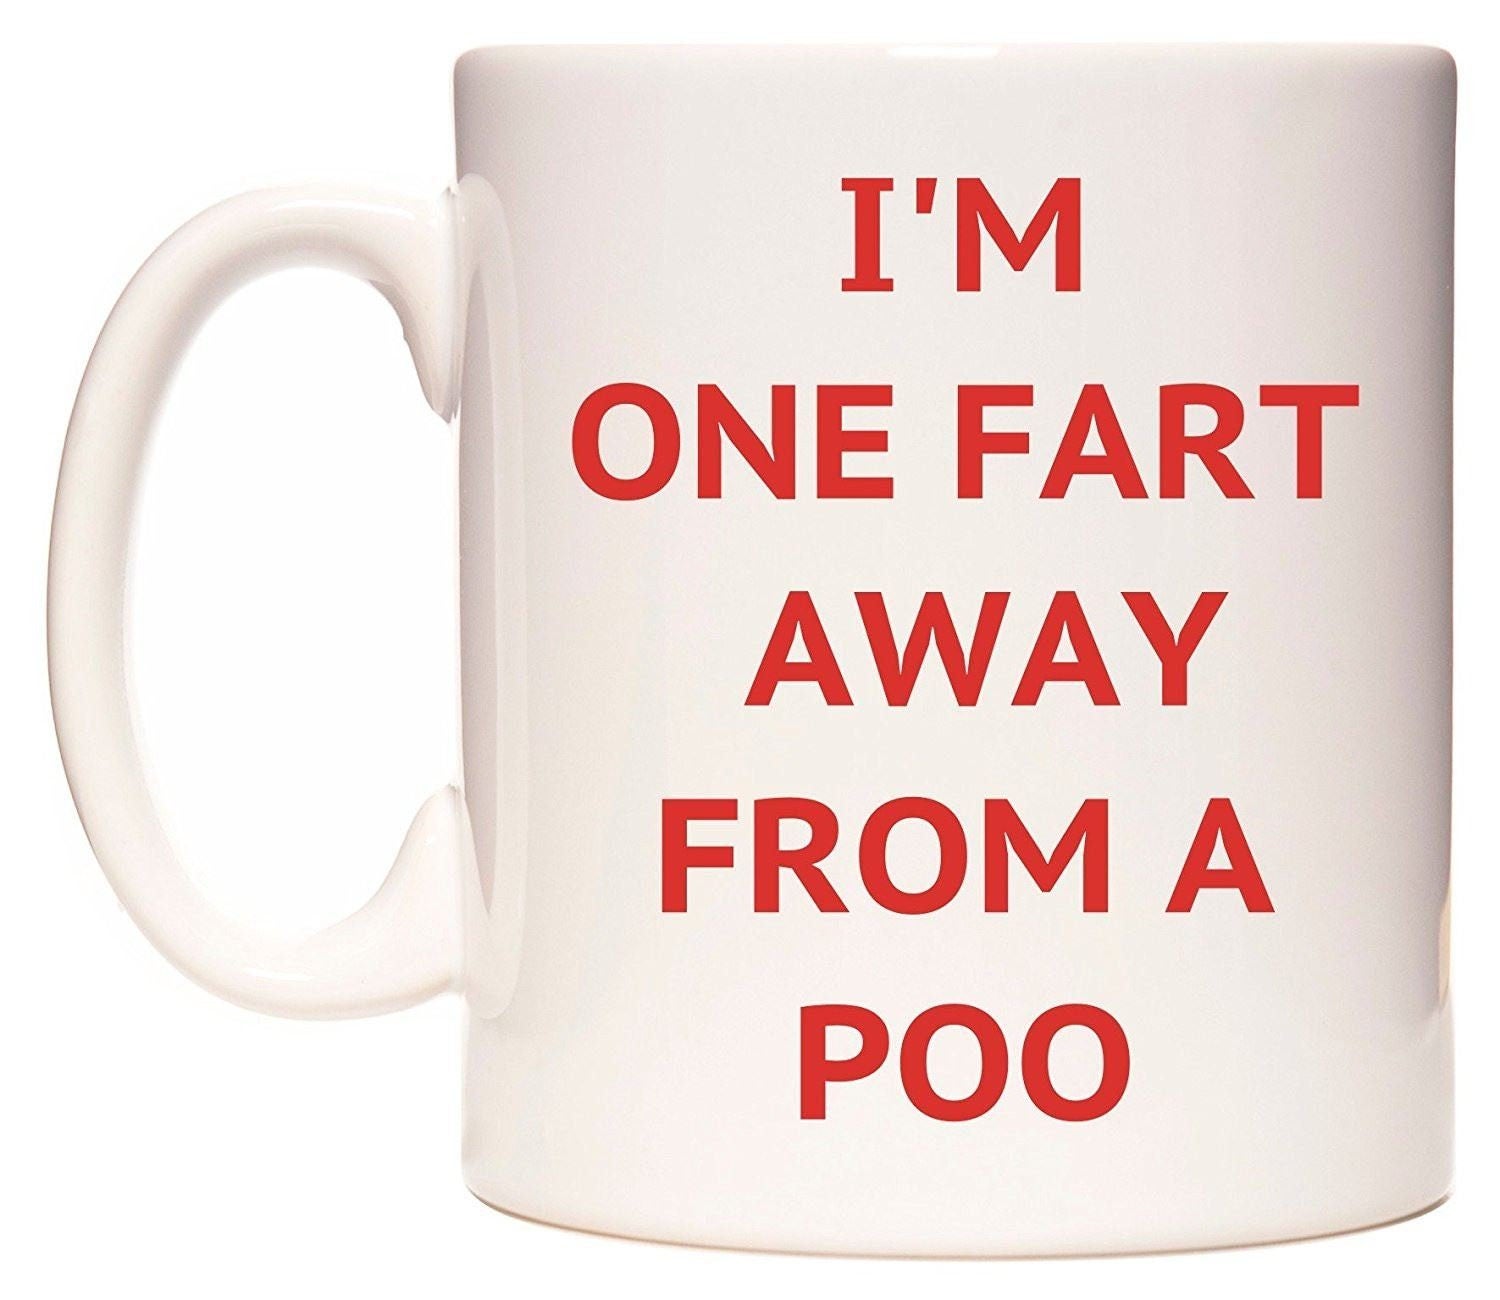 I'm one fart away from a poo. funny mug | Etsy